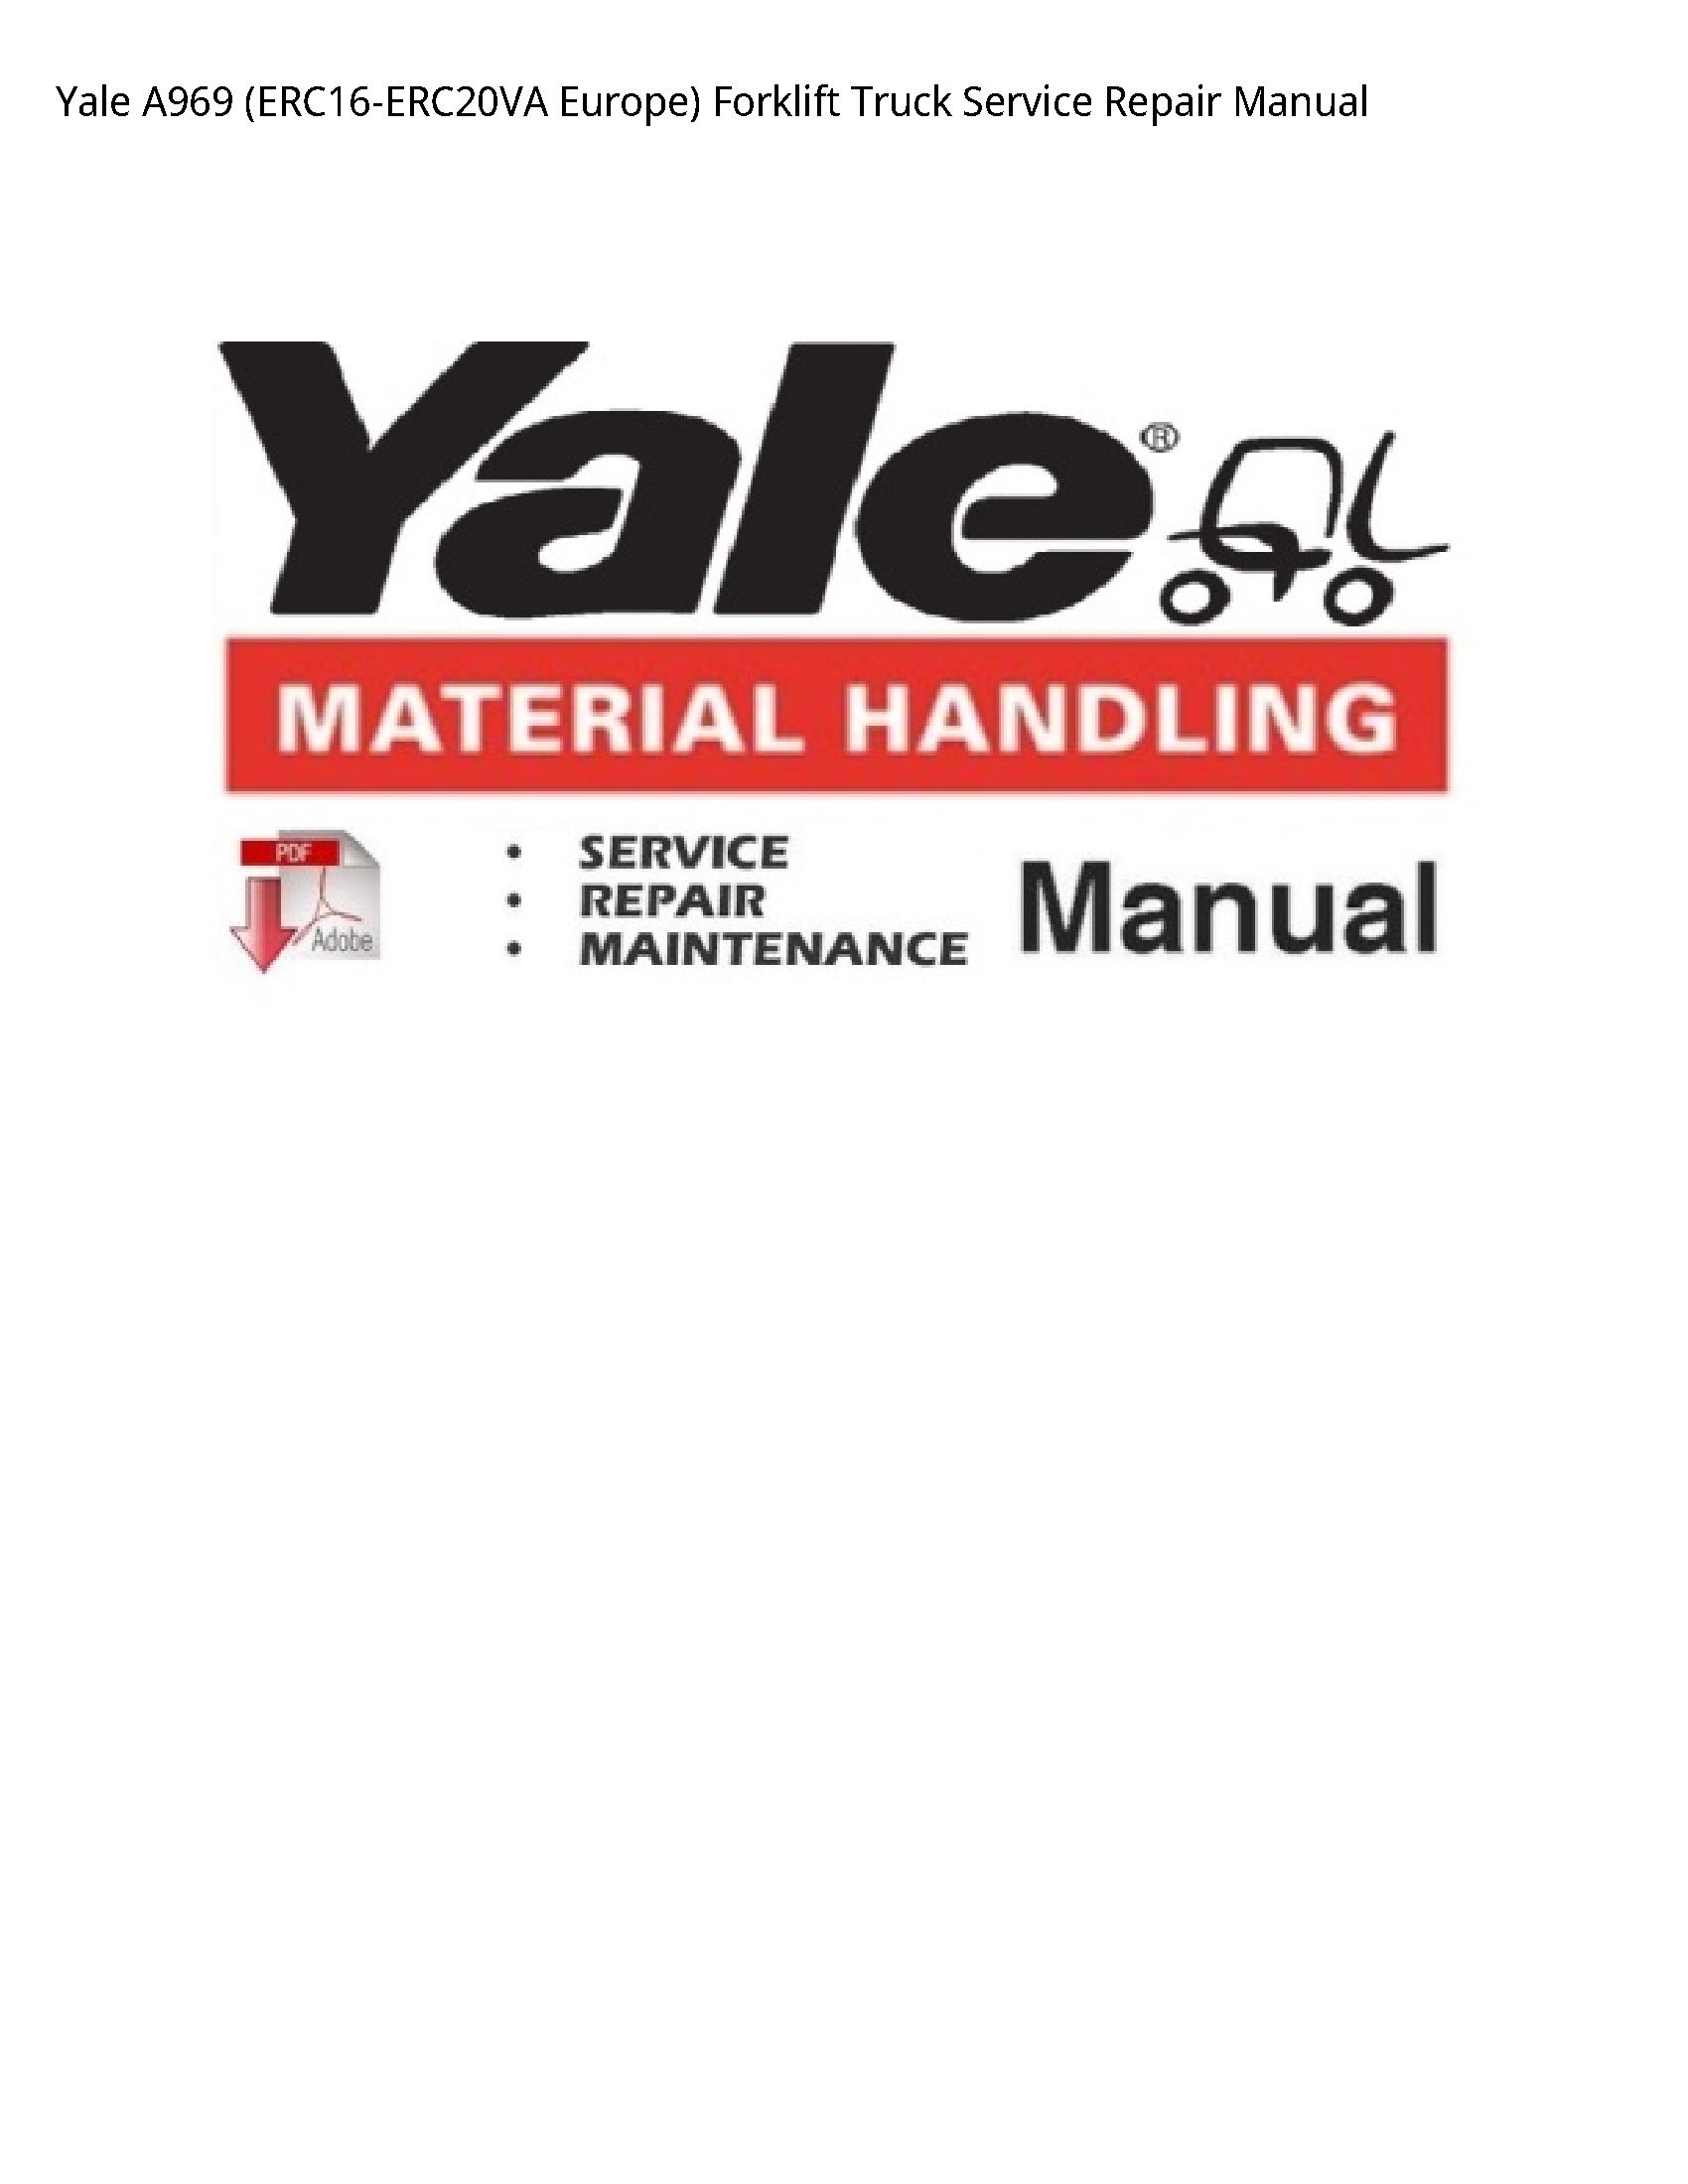 Yale A969 Europe) Forklift Truck manual